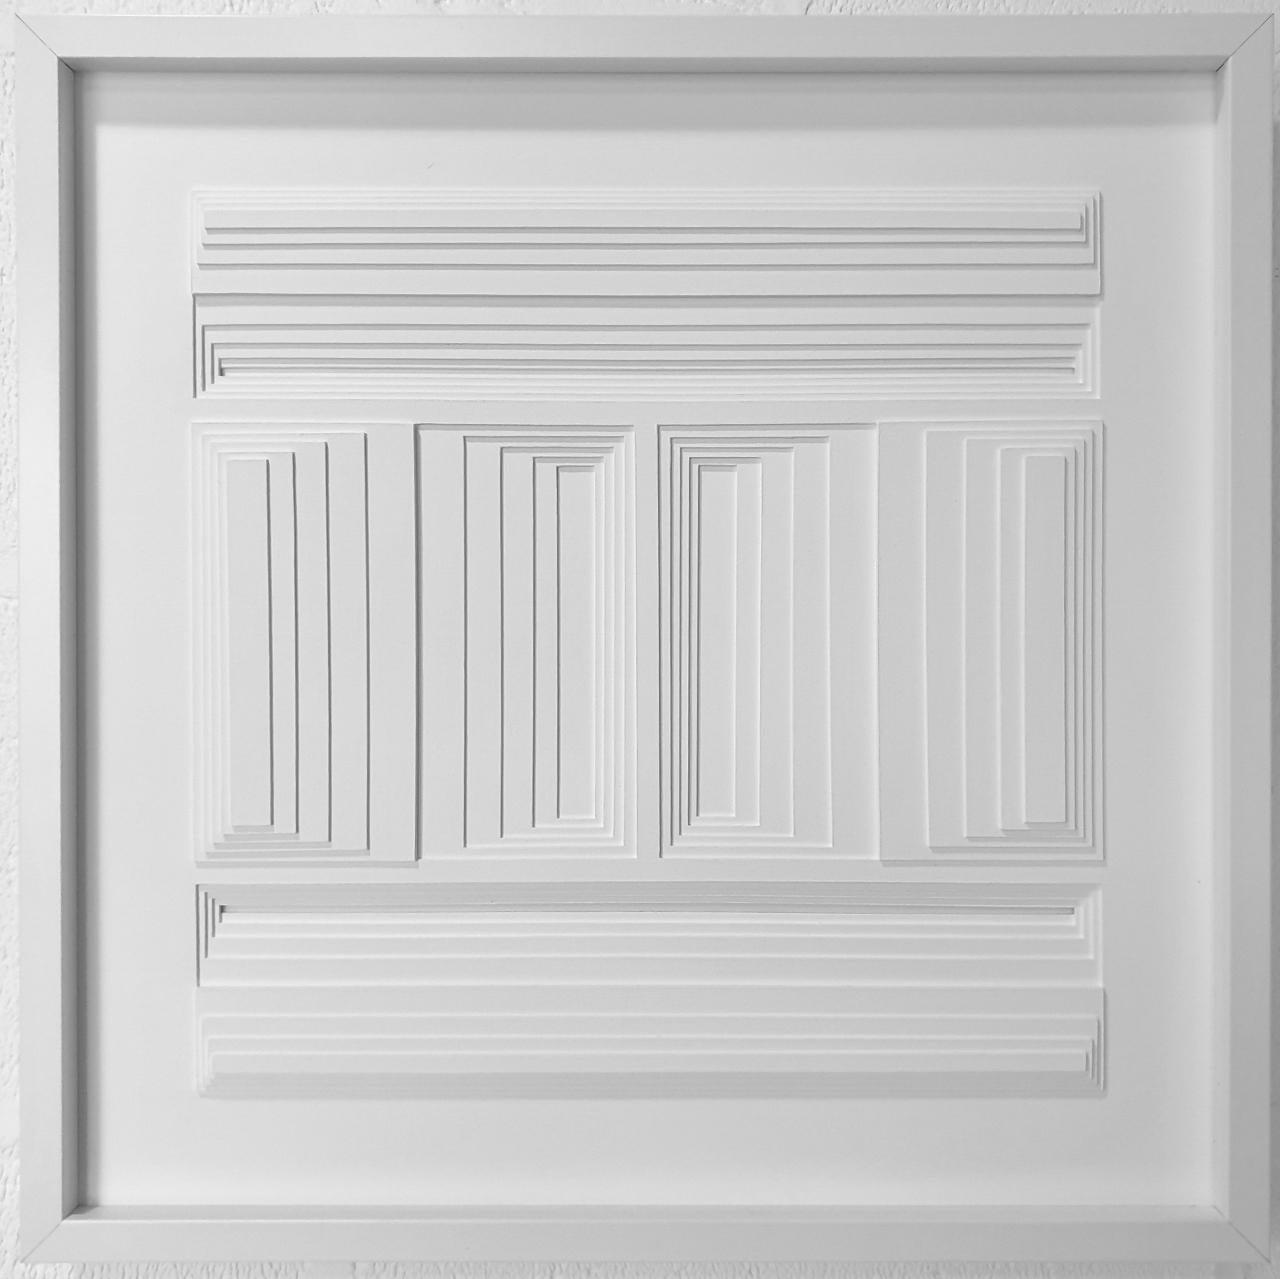 BB1601019 - contemporary modern abstract geometric painting relief